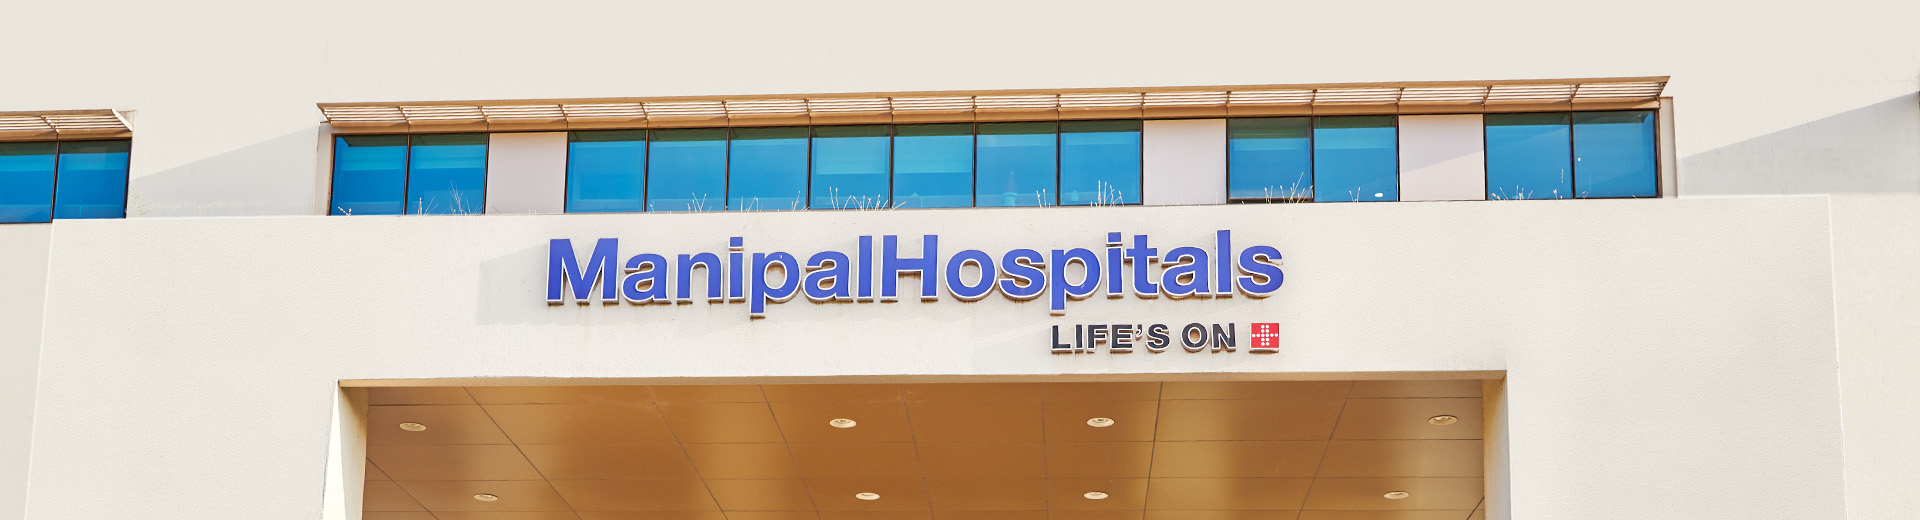 Super-Speciality Hospital in Goa | Critical Disease Treatment Centre - Manipal Hospital